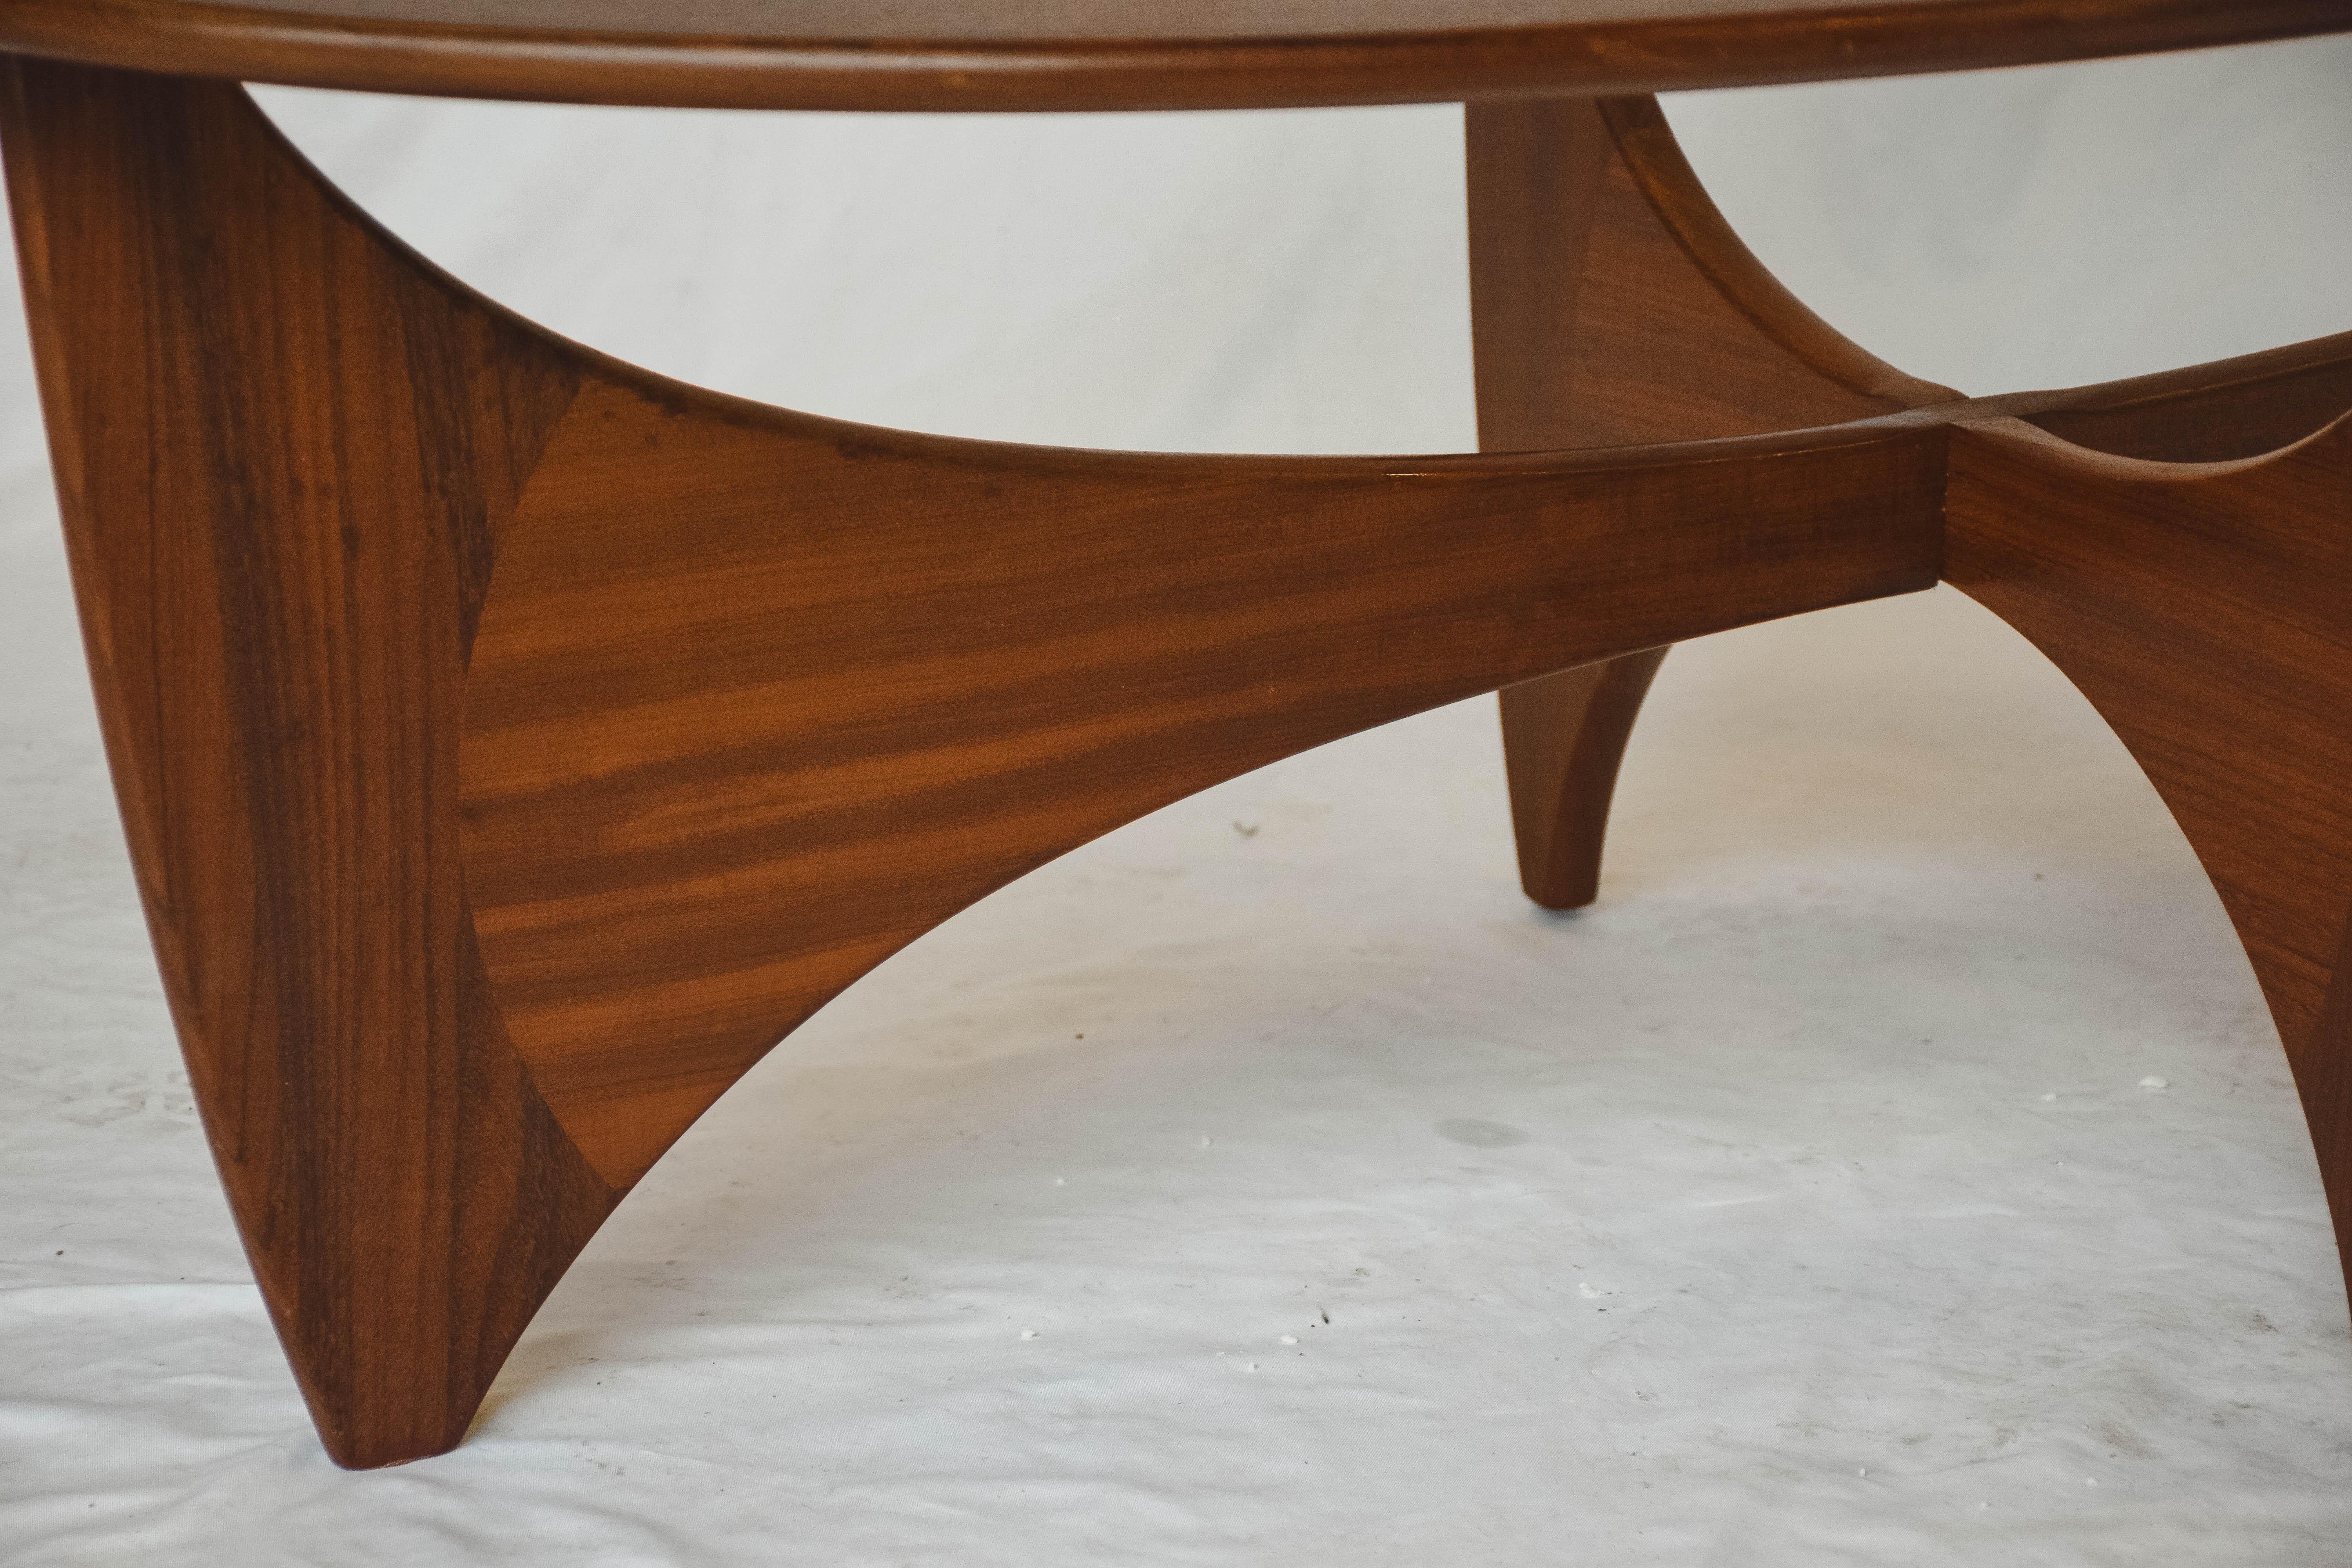 Teak Midcentury Oval 'Astro' Coffee Table with Glass Top by G-Plan, 1960